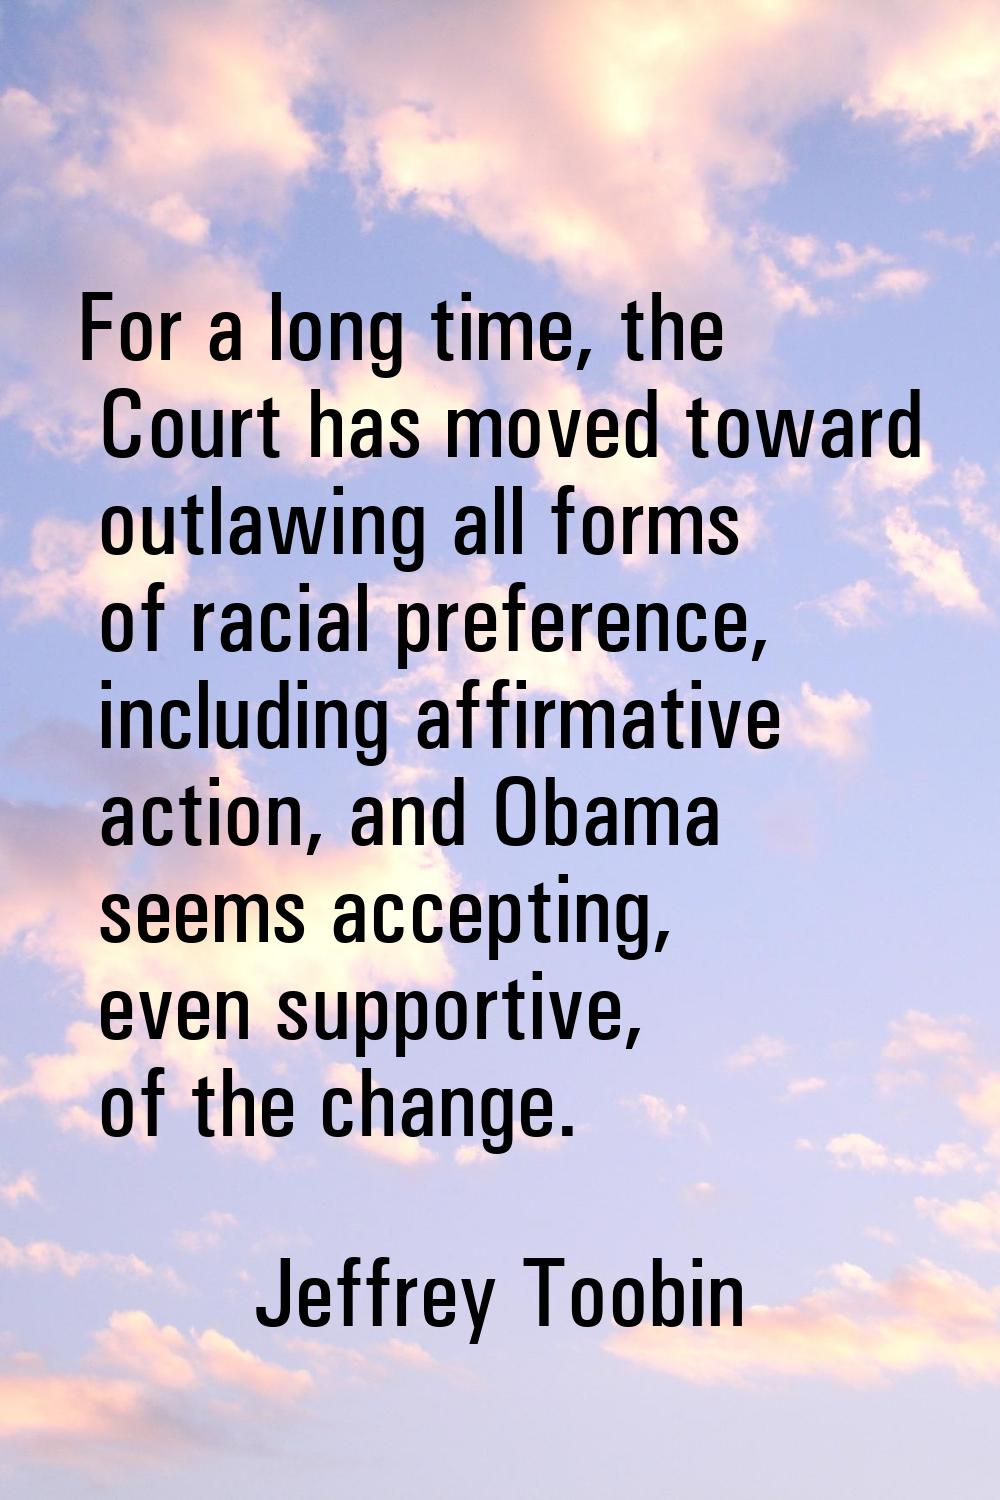 For a long time, the Court has moved toward outlawing all forms of racial preference, including aff